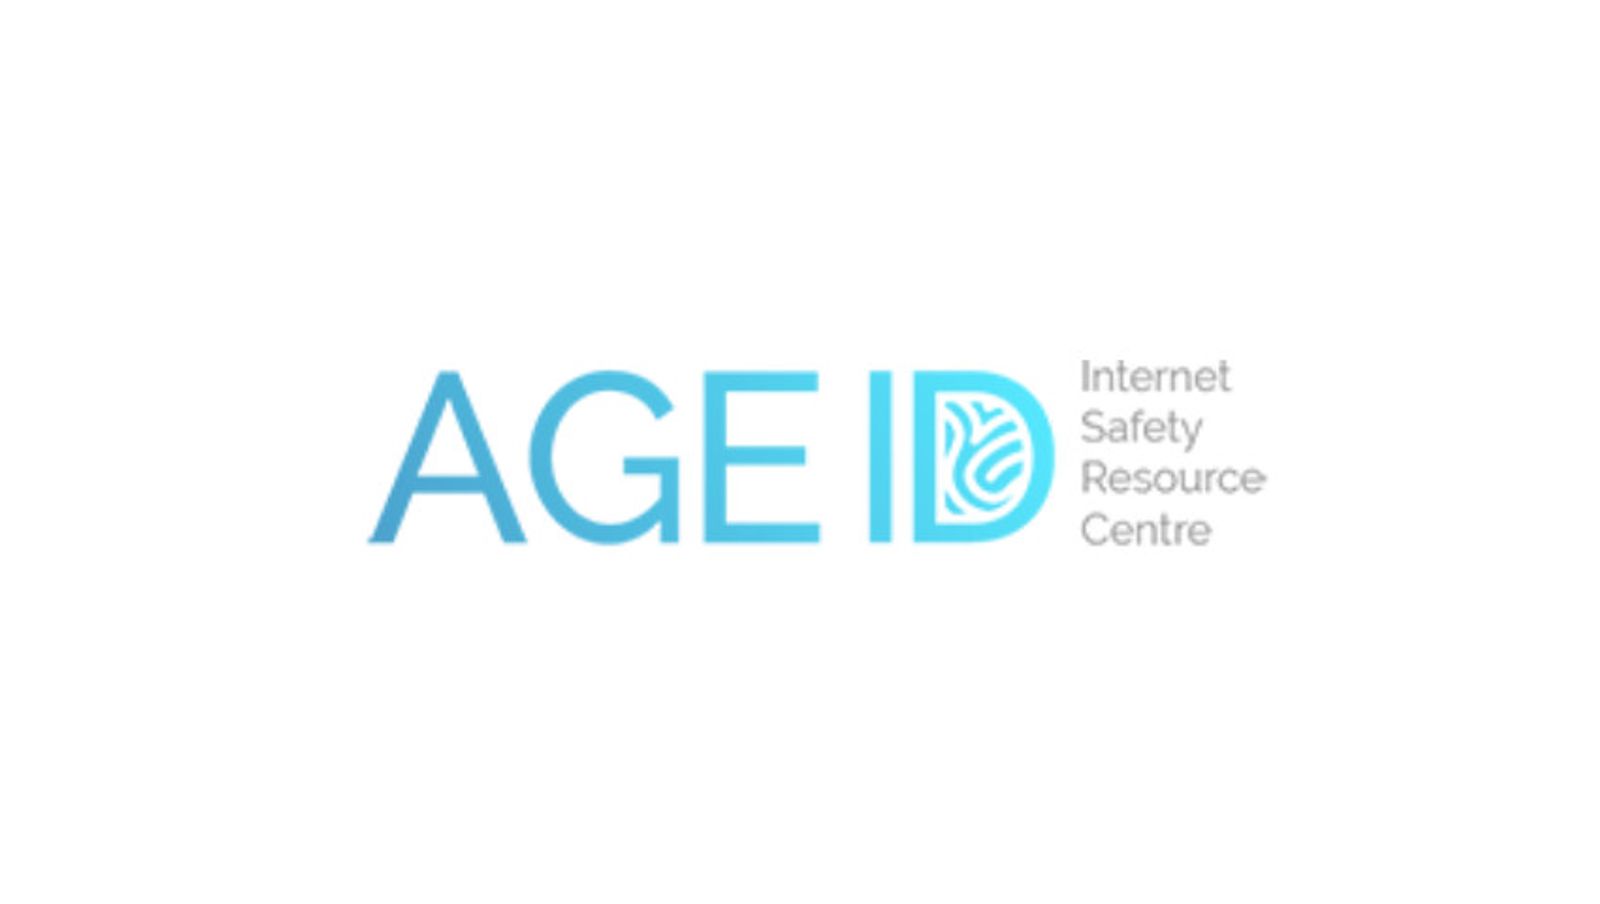 AgeID Launches Internet Safety Resource Centre